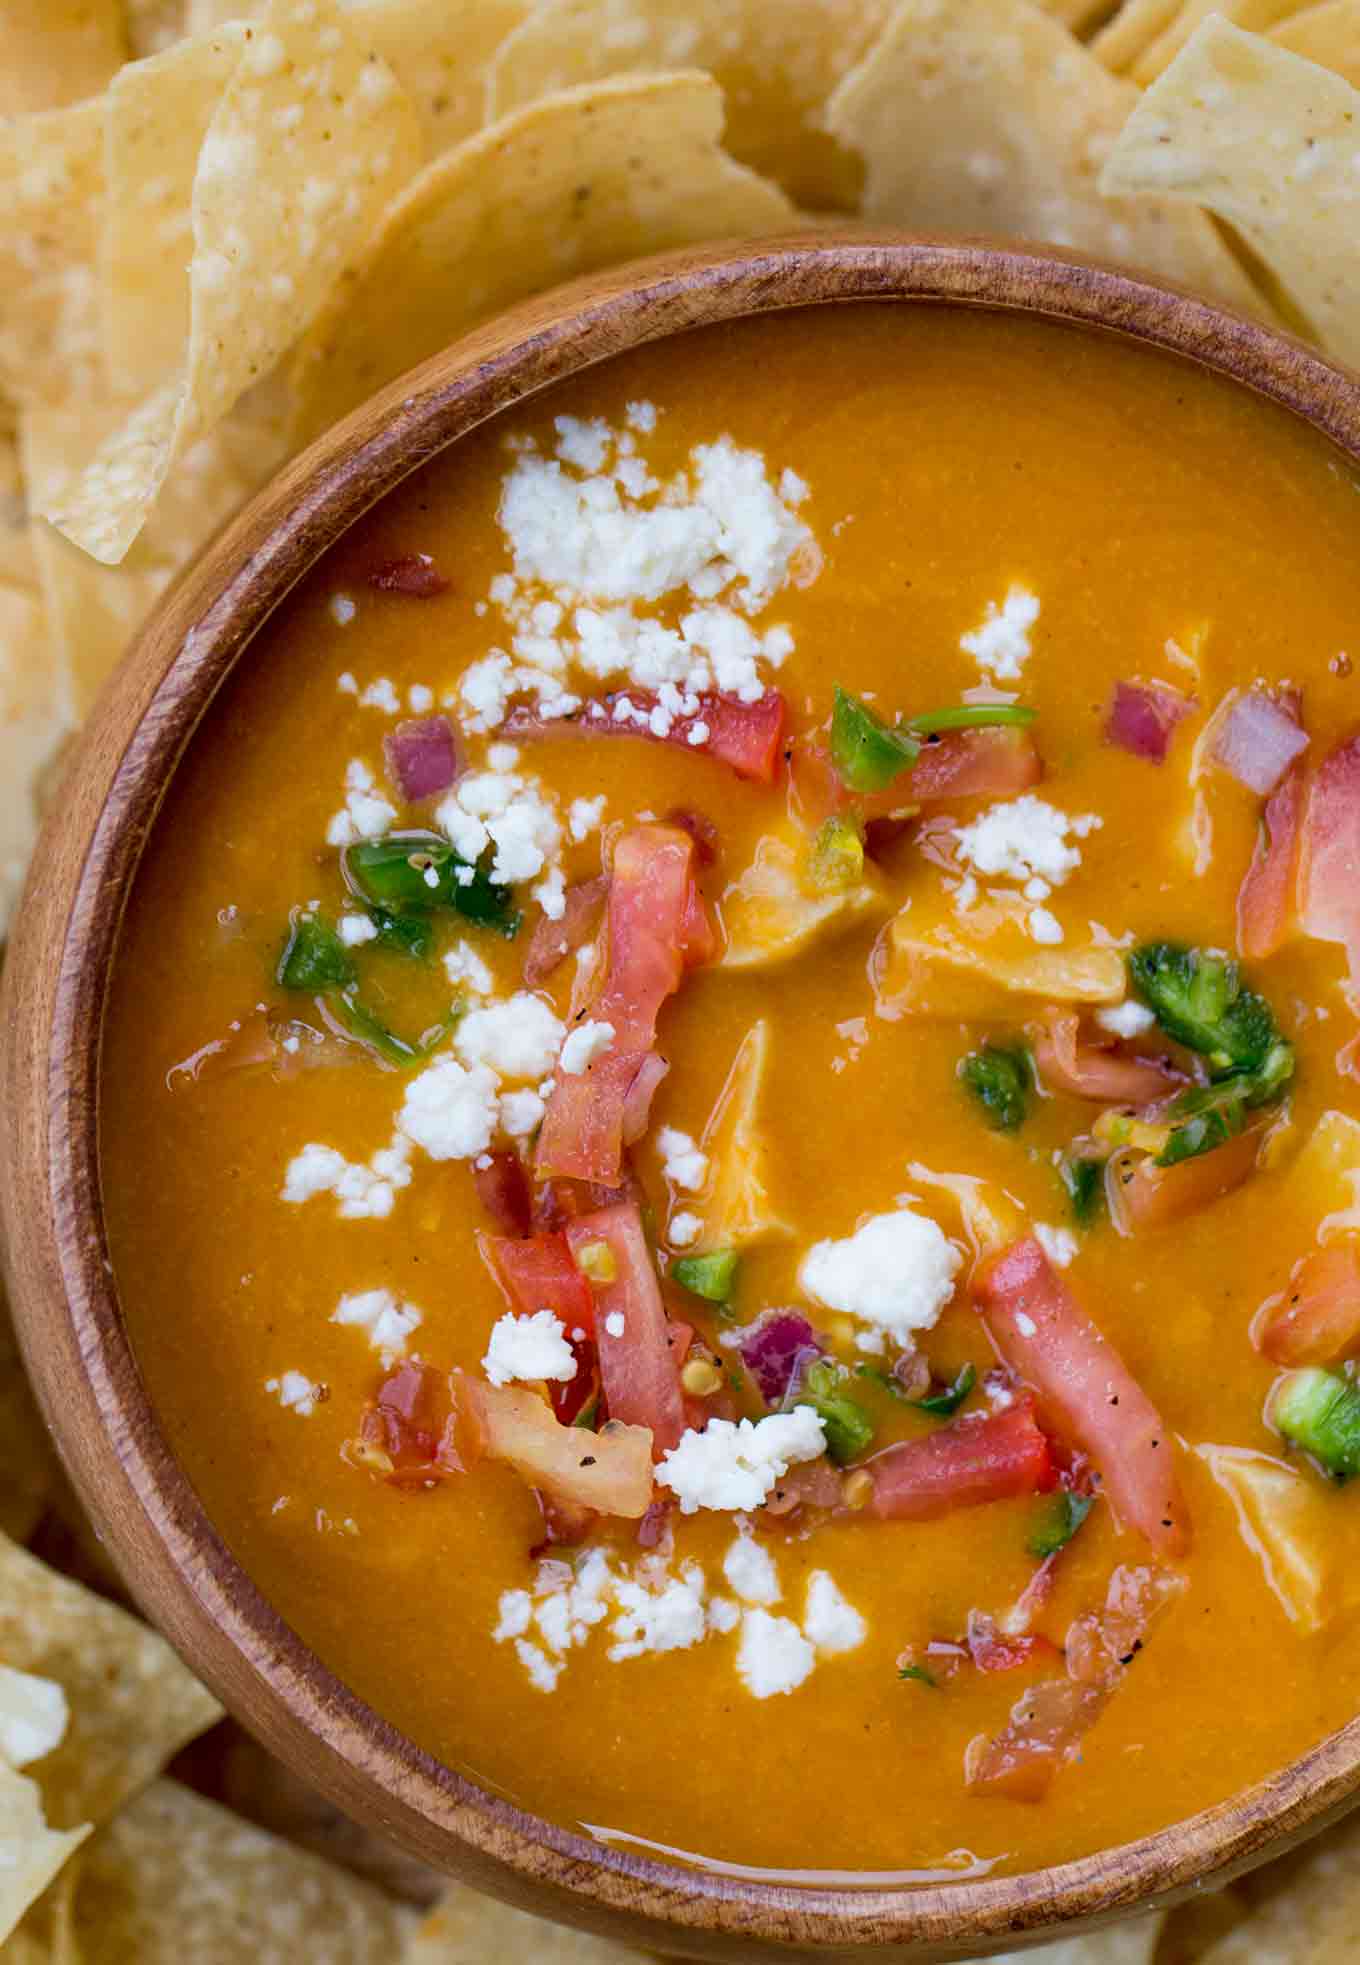 Chili's Chicken Enchilada Soup copycat is creamy, rich, slightly spicy and thick blended together and topped with chunks of chicken breast meat.